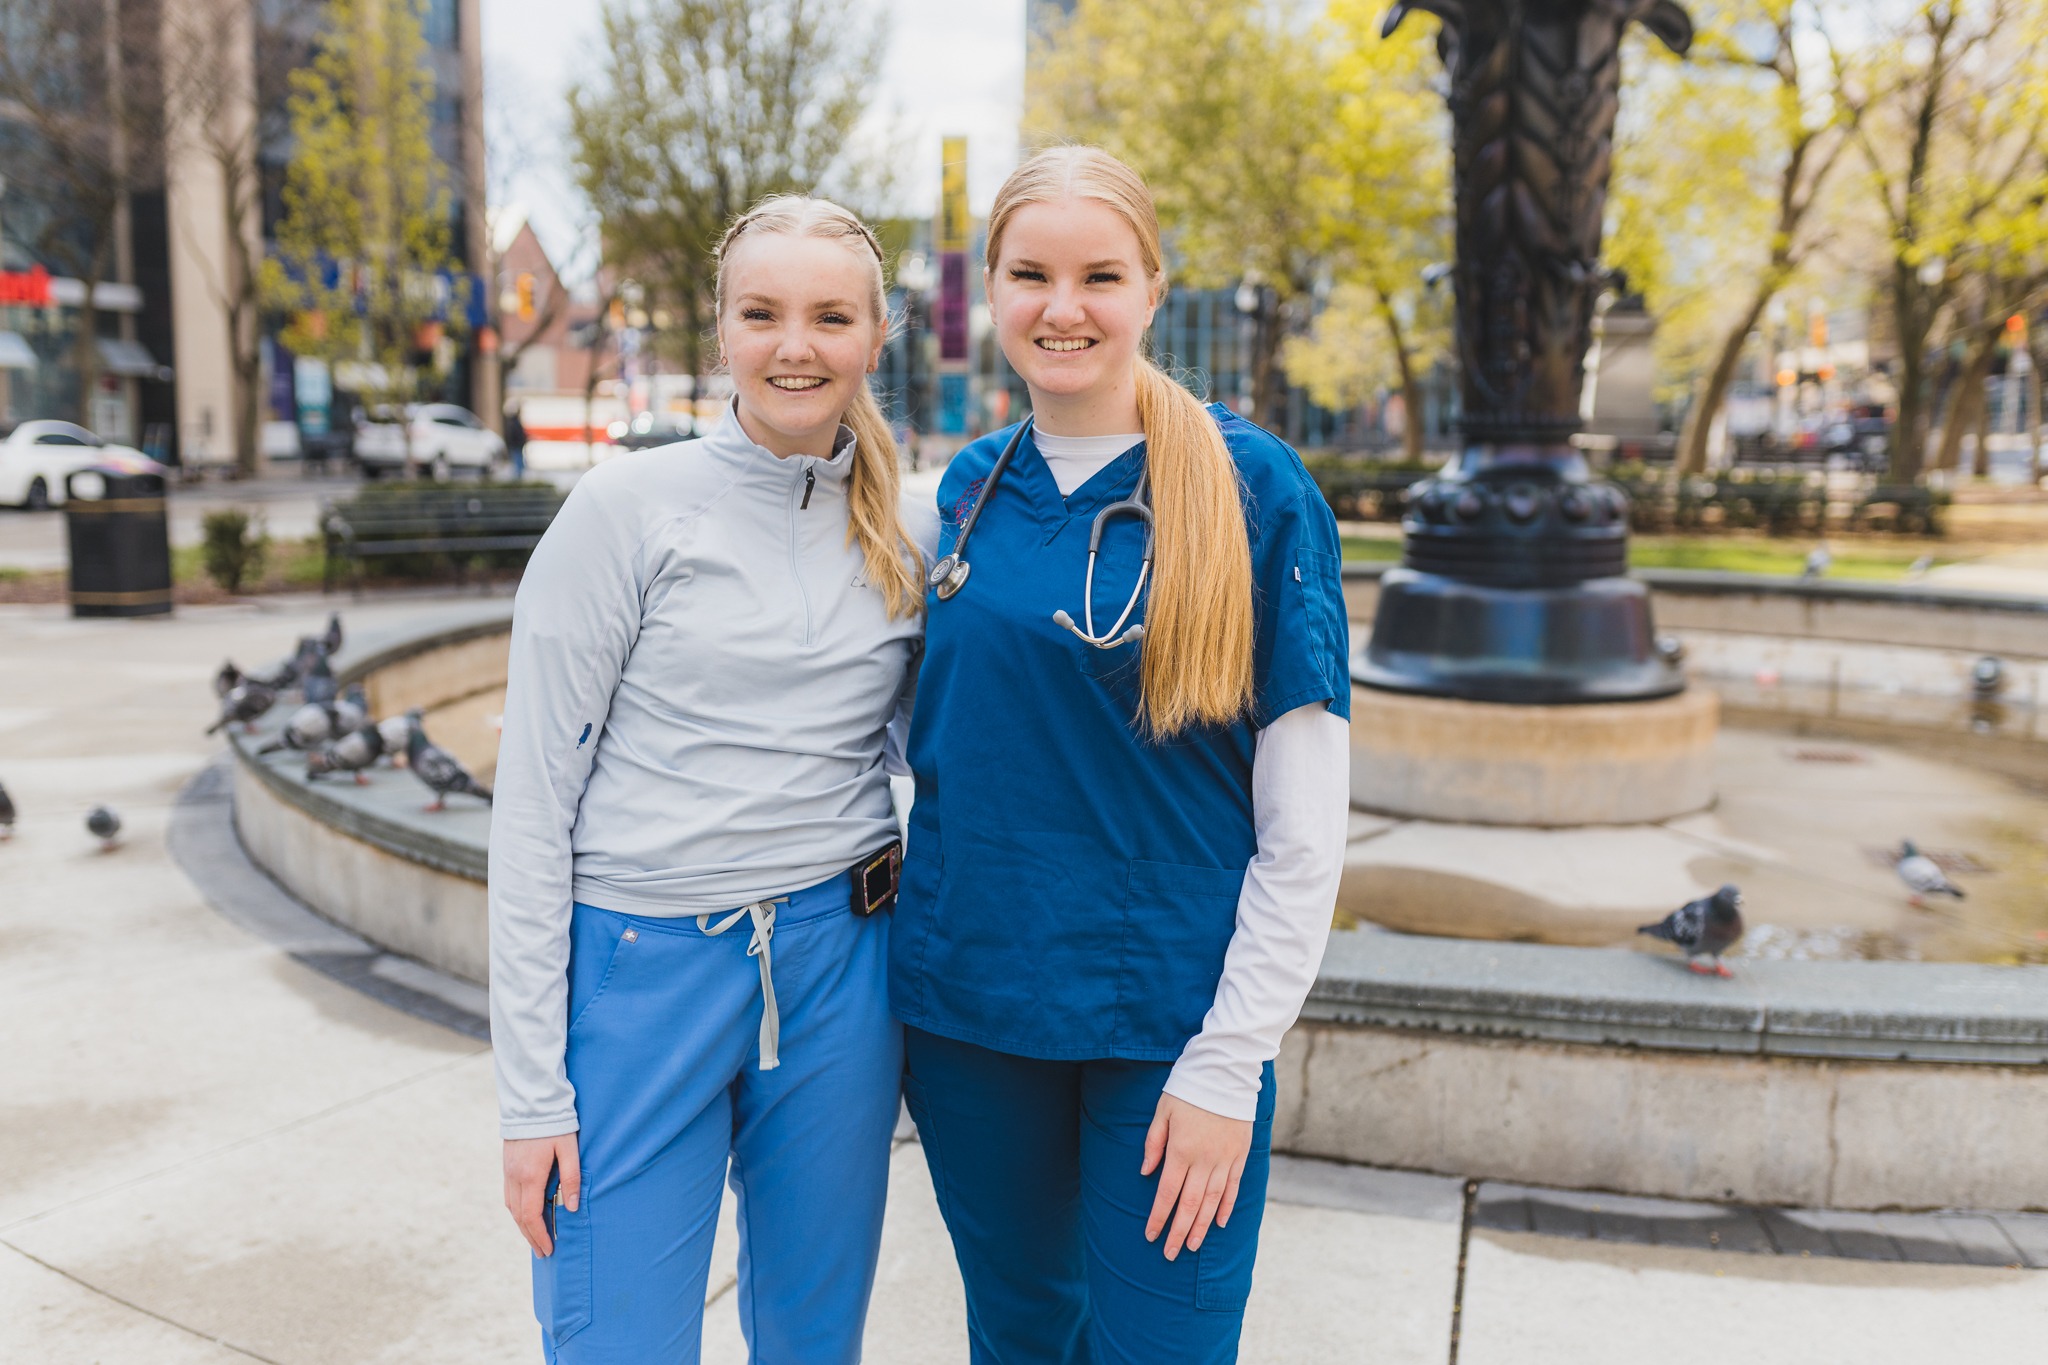 Sisters Nicole and Natalie Gelms have very personal reasons for pursuing careers in health care.